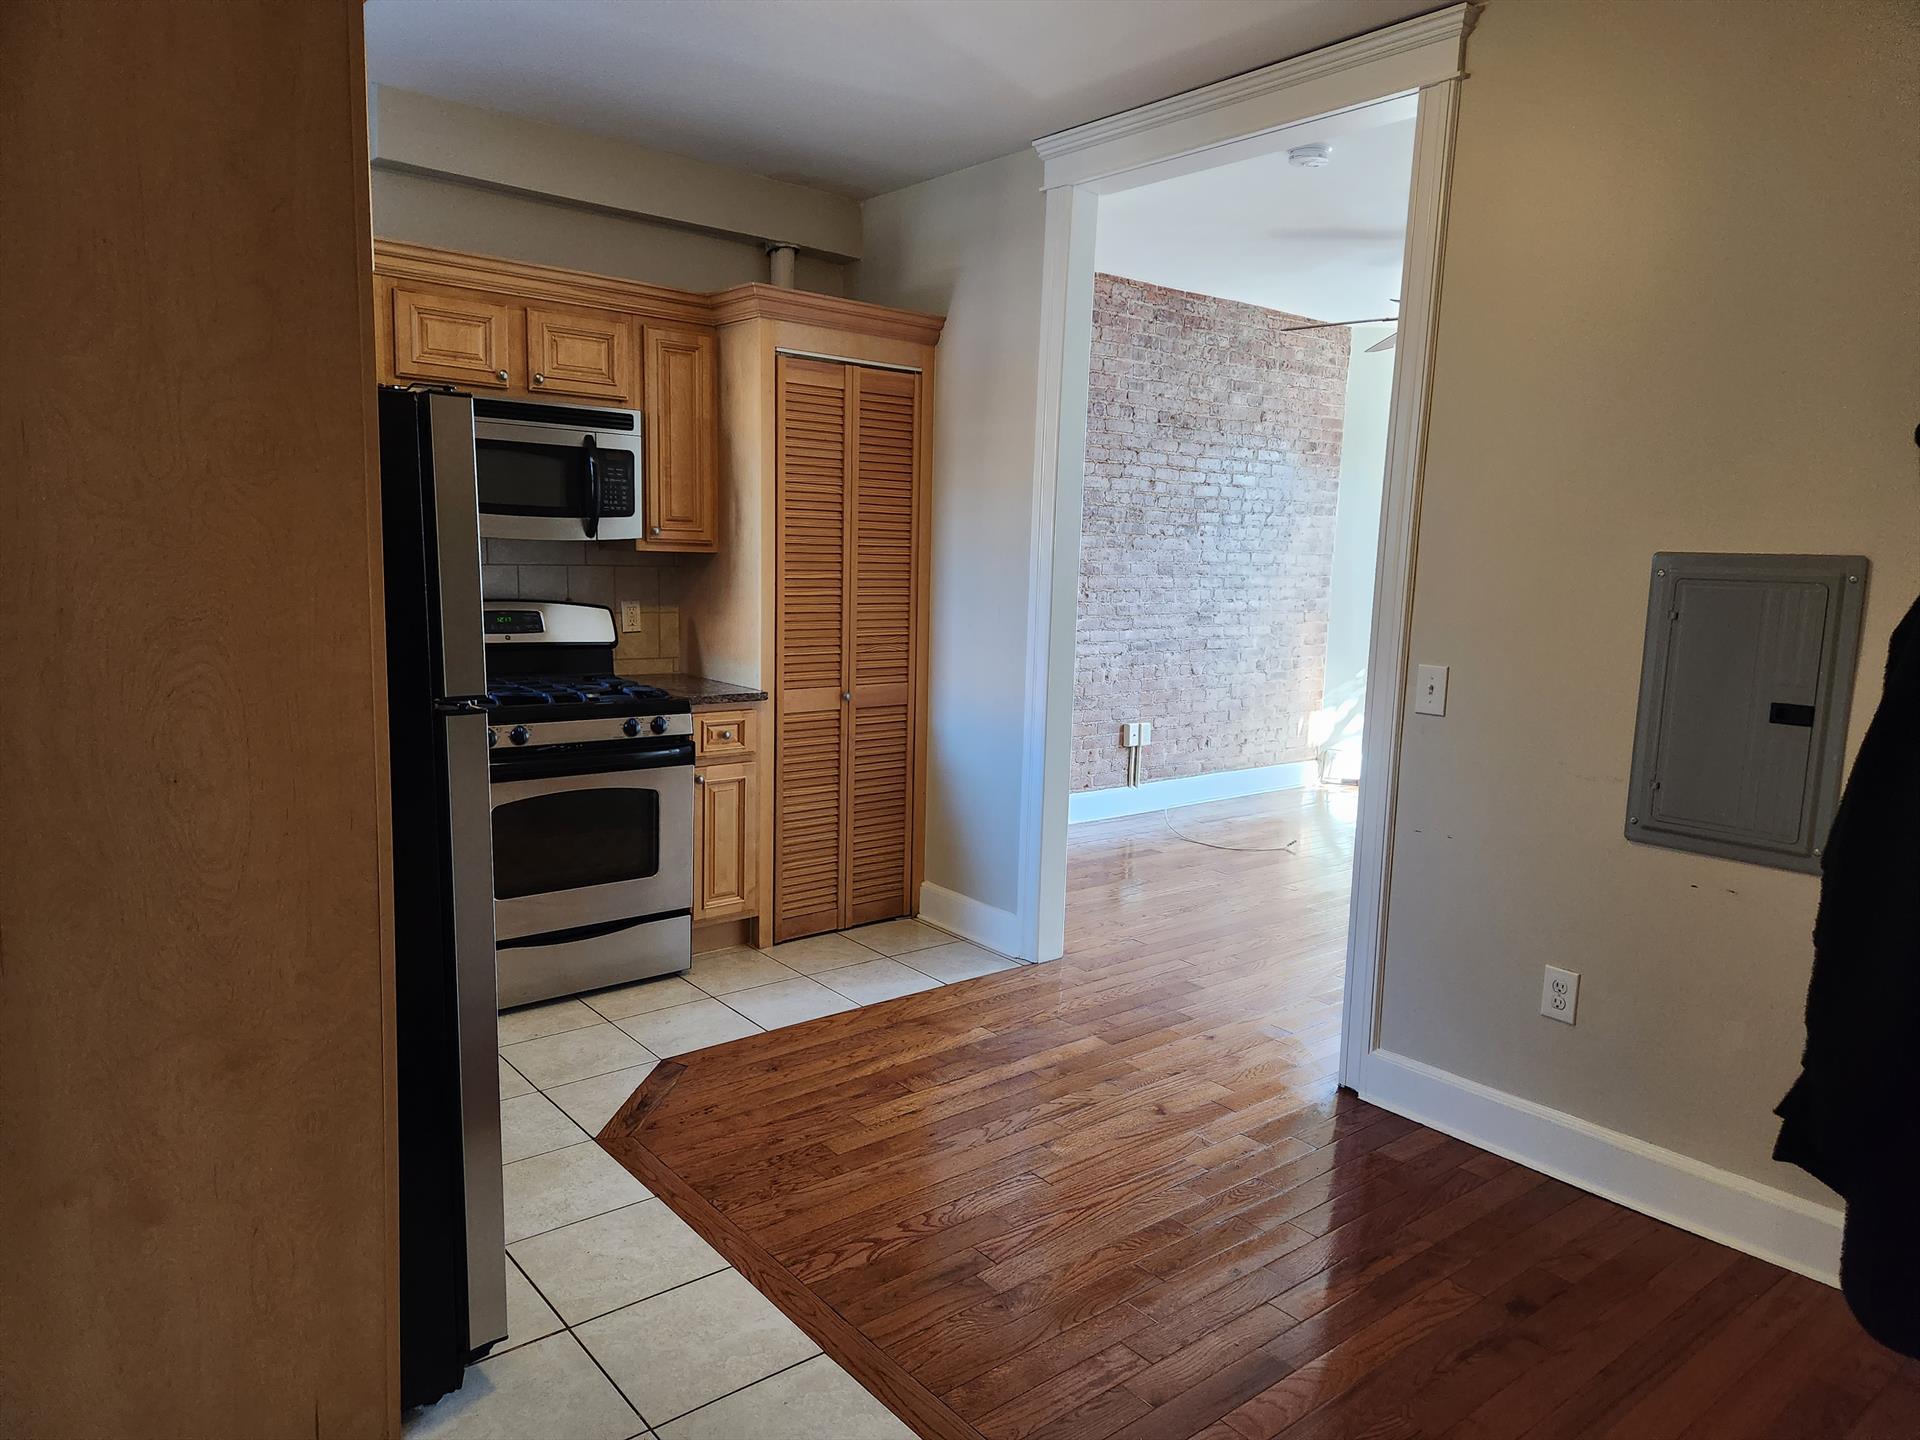 In the heart of Hoboken we offer you a bright and airy 2 bedroom unit with exposed brick and eat in kitchen. Near transportation, shopping and dining. 